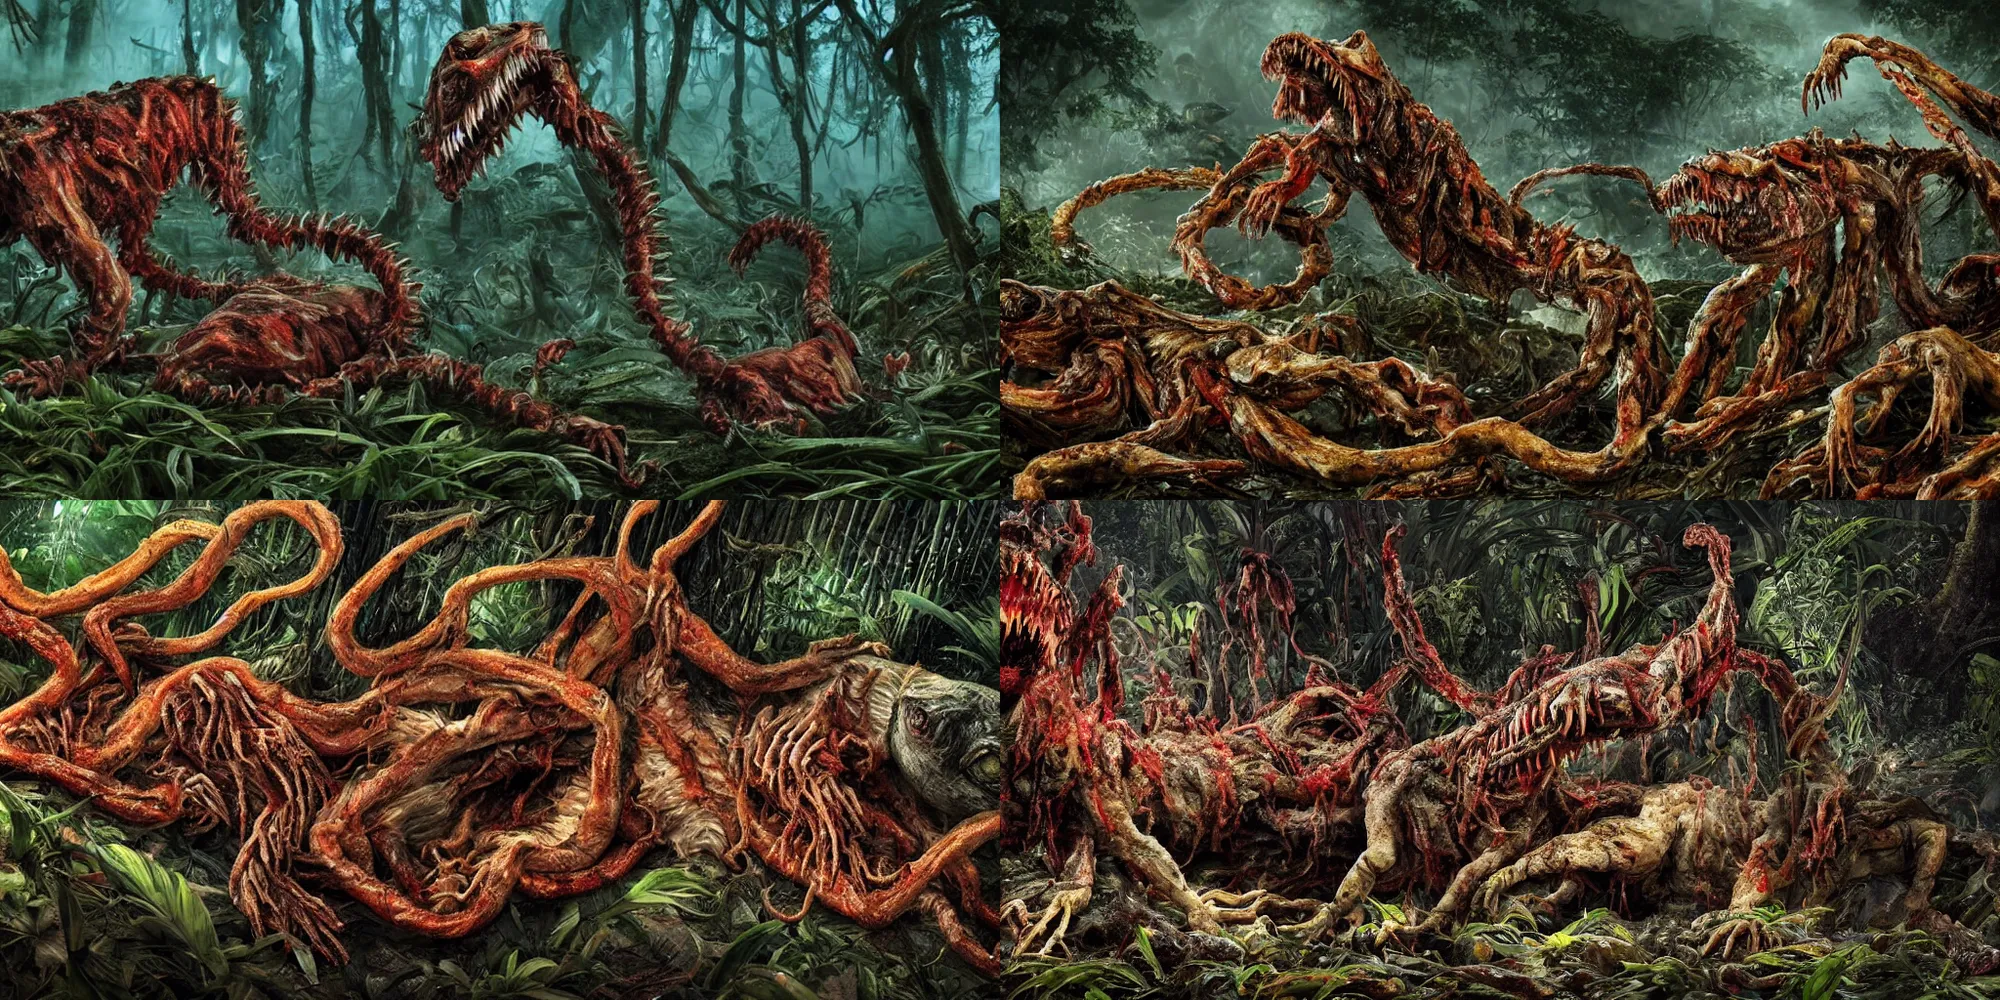 Prompt: an ultra-detailed high-quality photo of twisted animals and hostile tubifex worms melting together, forming a livid amorphous mass of blood-oozing body horror composed of random limbs, jaws full of sharp teeth, patches of fur, glowing eyes, and intestines falling out and slithering, in a deep lush jungle at night, hazy atmosphere